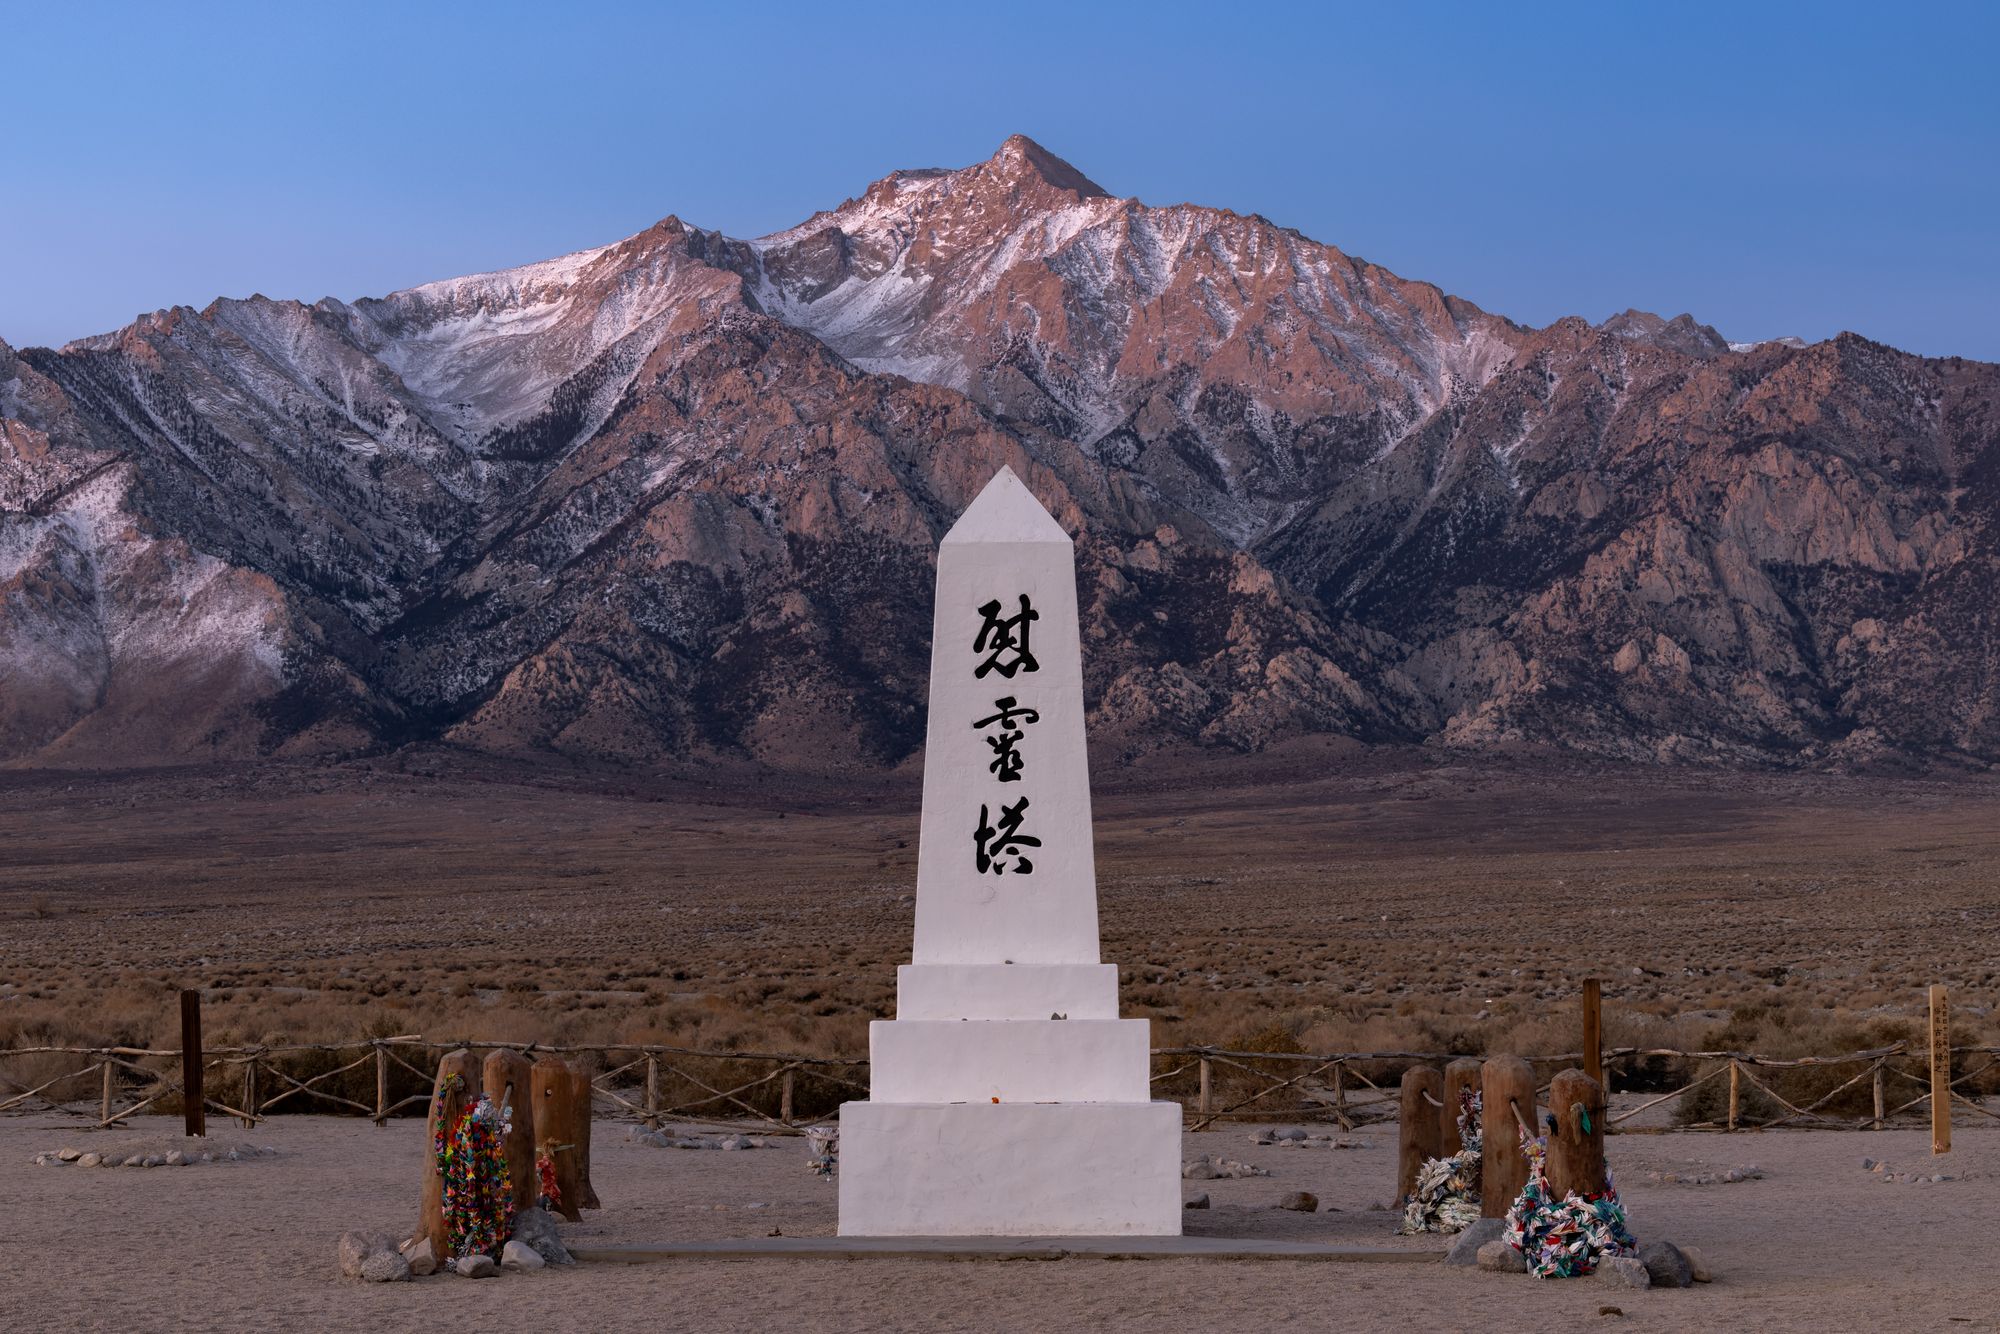 Vibrant sunrise view of the white monument (the Kanji characters literally mean soul consoling tower, 慰霊塔) at Manzanar Cemetery, with Mount Williamson and the Eastern Sierra seen in the background being touched by the first soft pink sunlight of the new day.